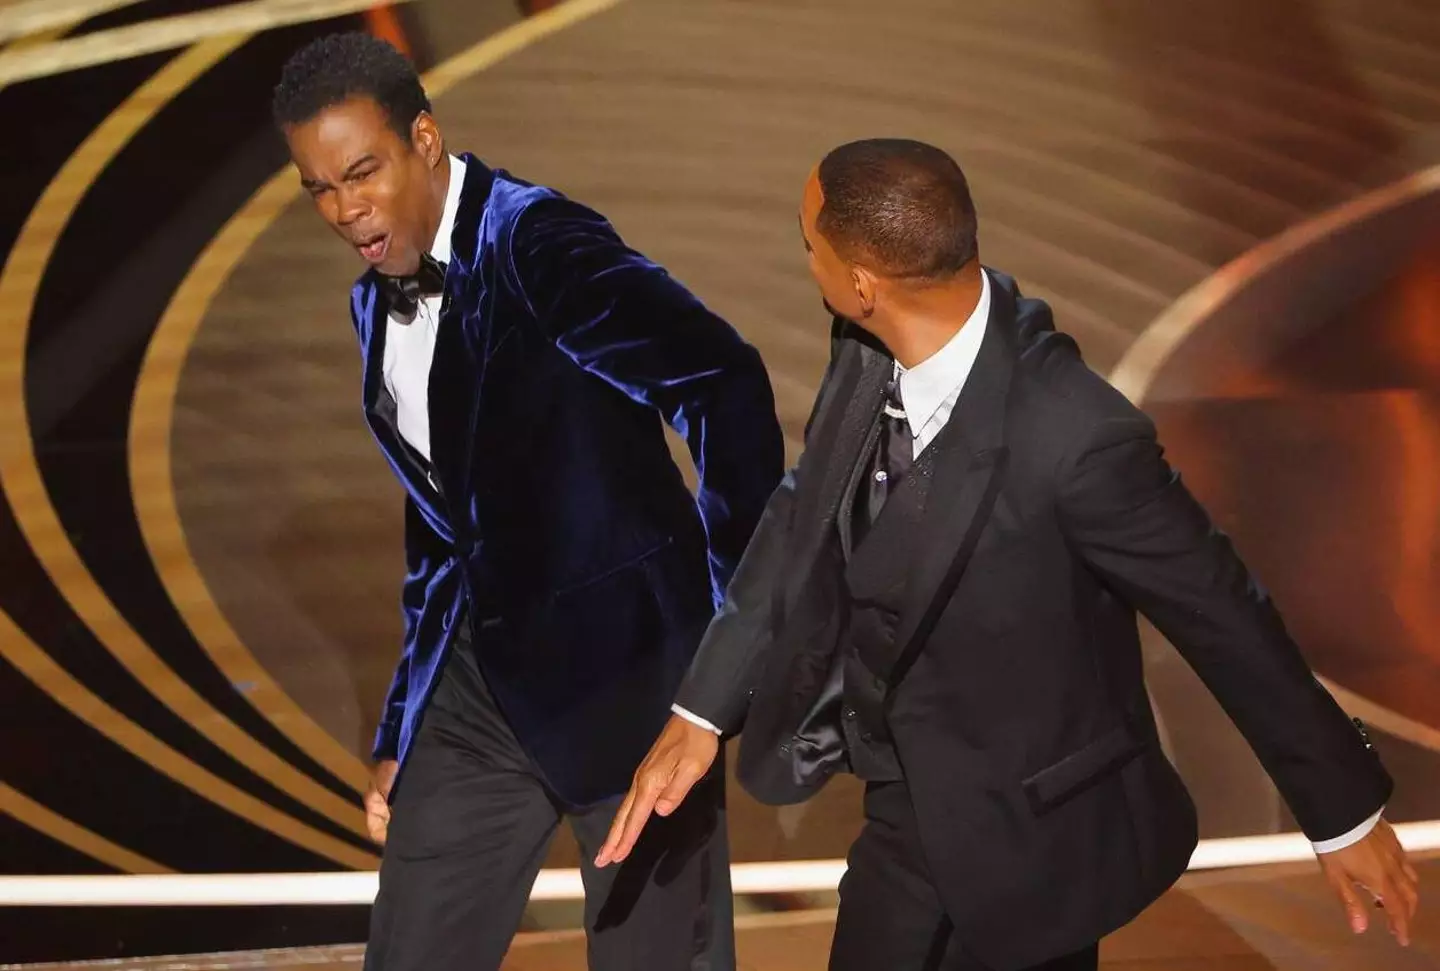 Jim Carrey weighed in on Will Smith's aggressive behaviour towards Chris Rock at this year's Oscars.